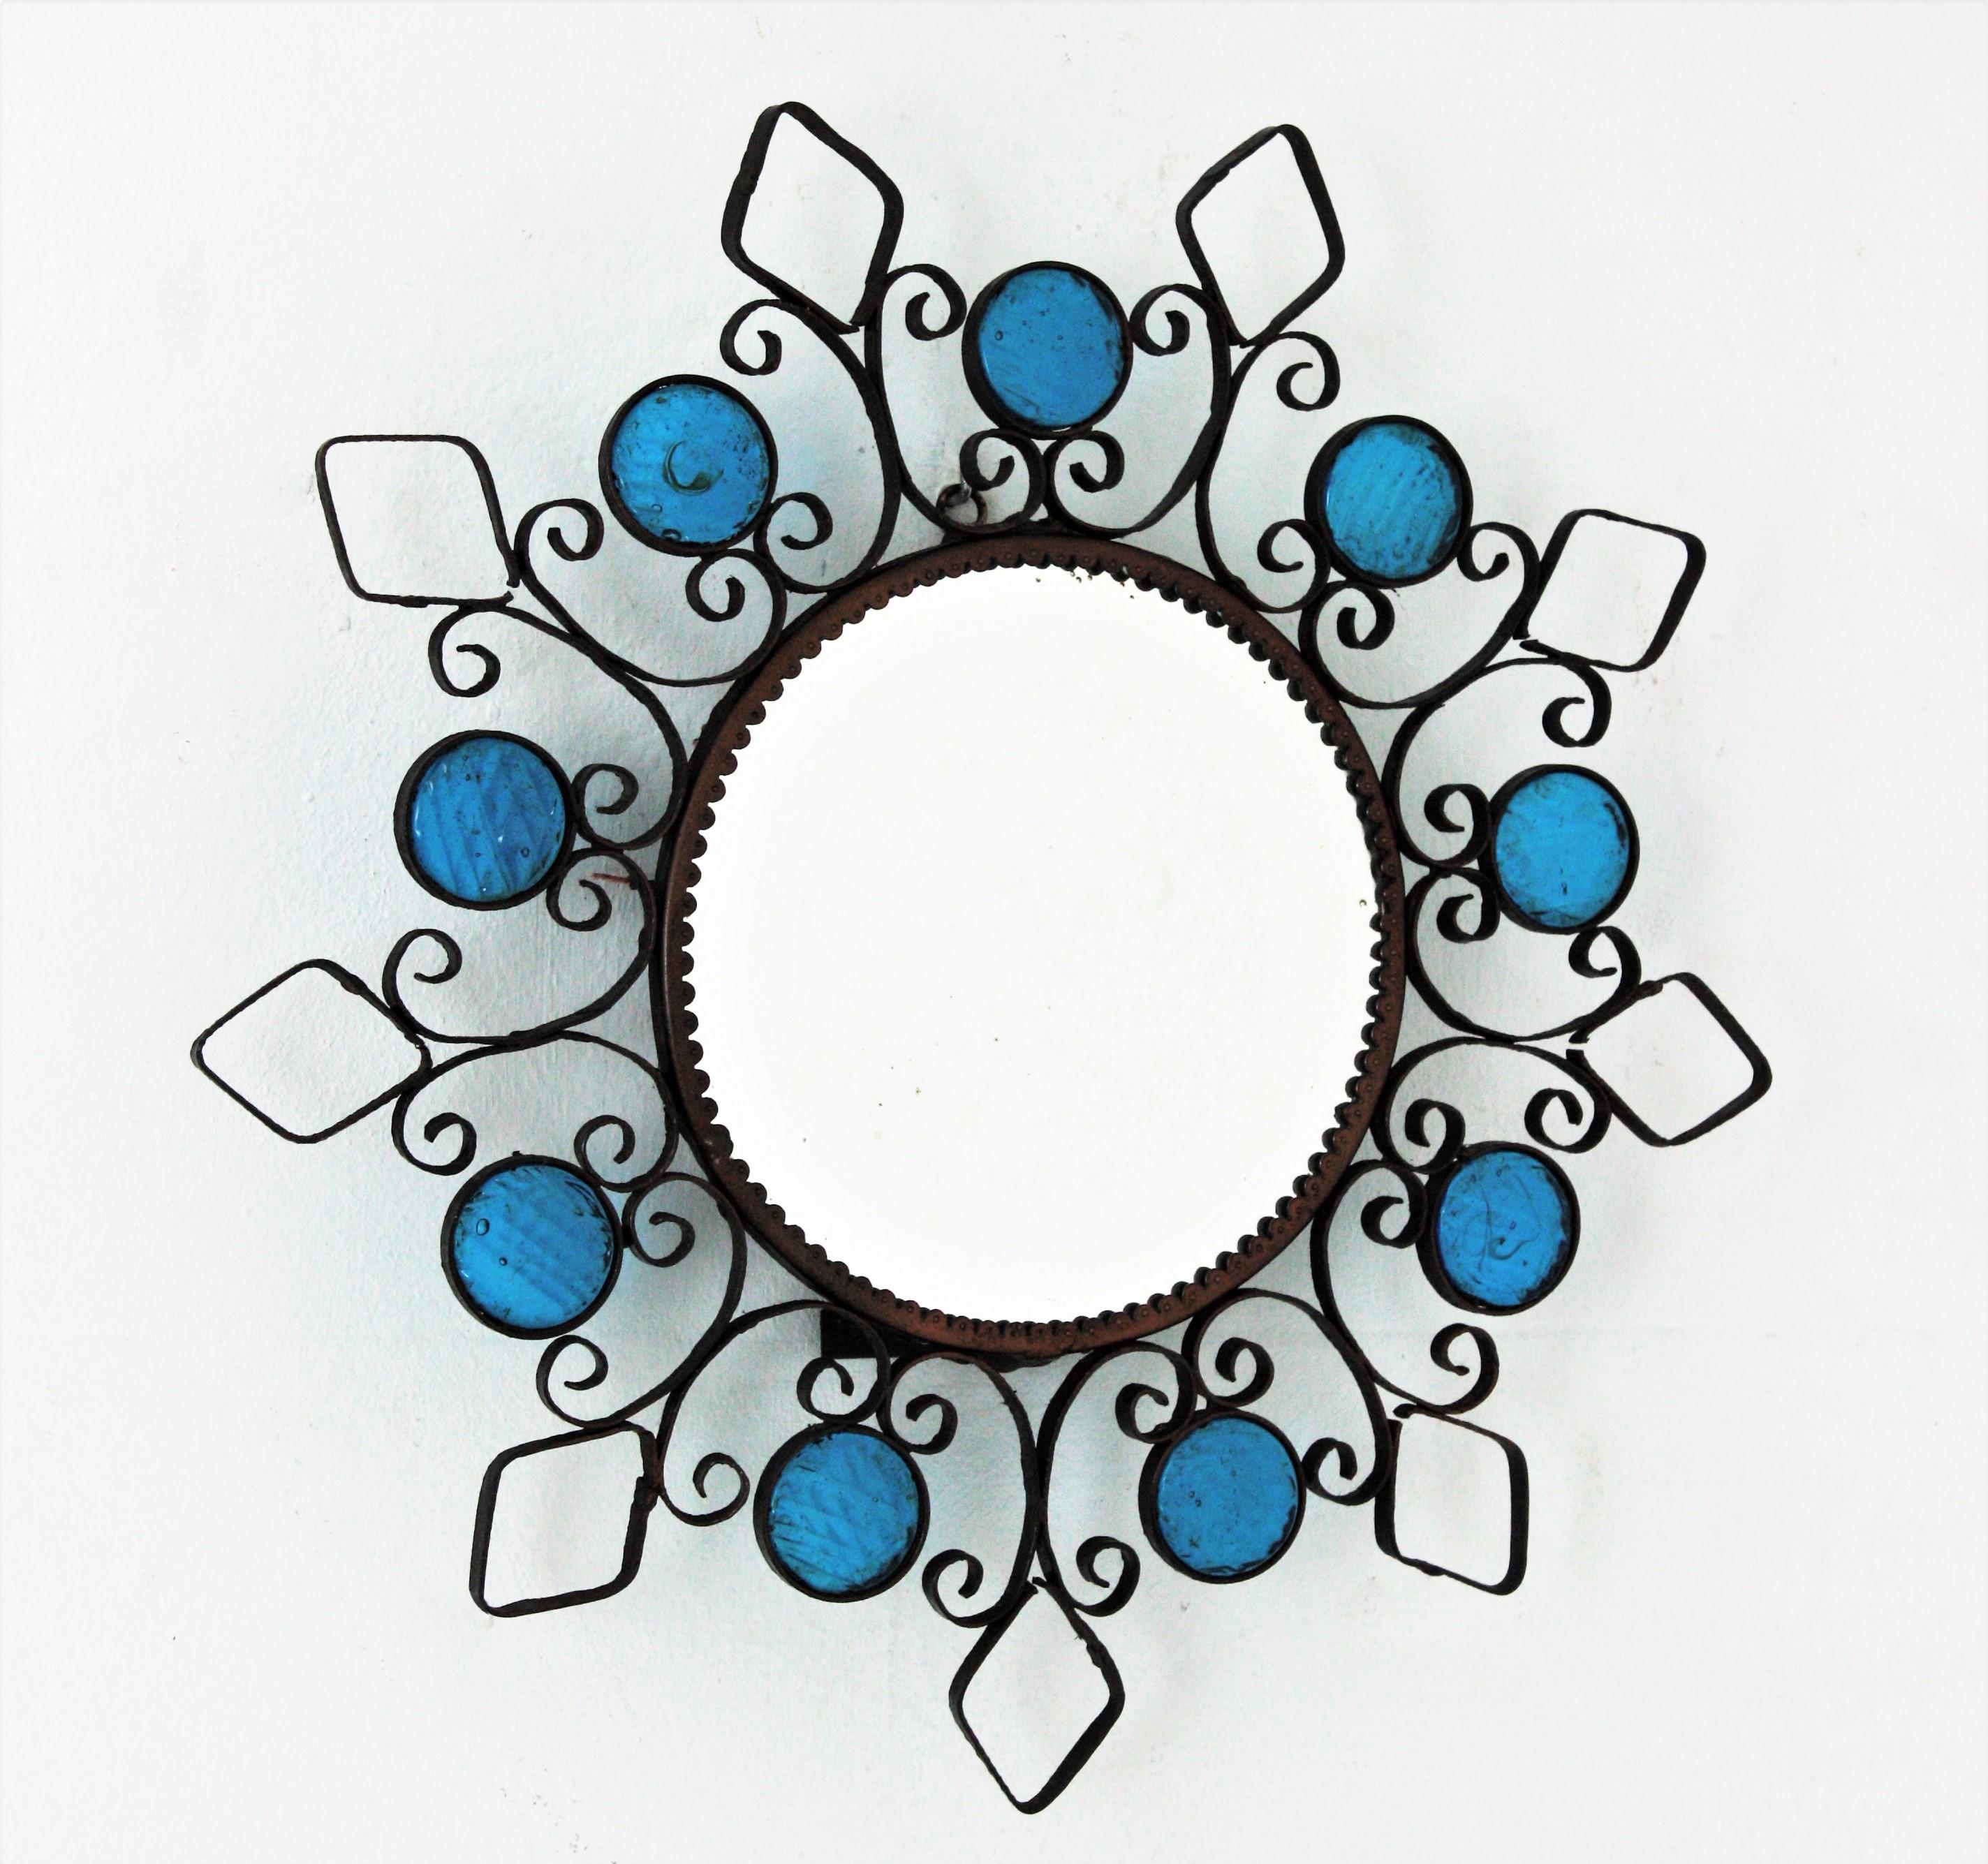 Beautiful wrought iron backlit sunburst mirror accented by blue glass circles, Spain, 1950s.
This backlit wall mirror features a wrought iron frame with scrolled details, rhombus and circles adorned by small pieces of textured blue glass.
It can